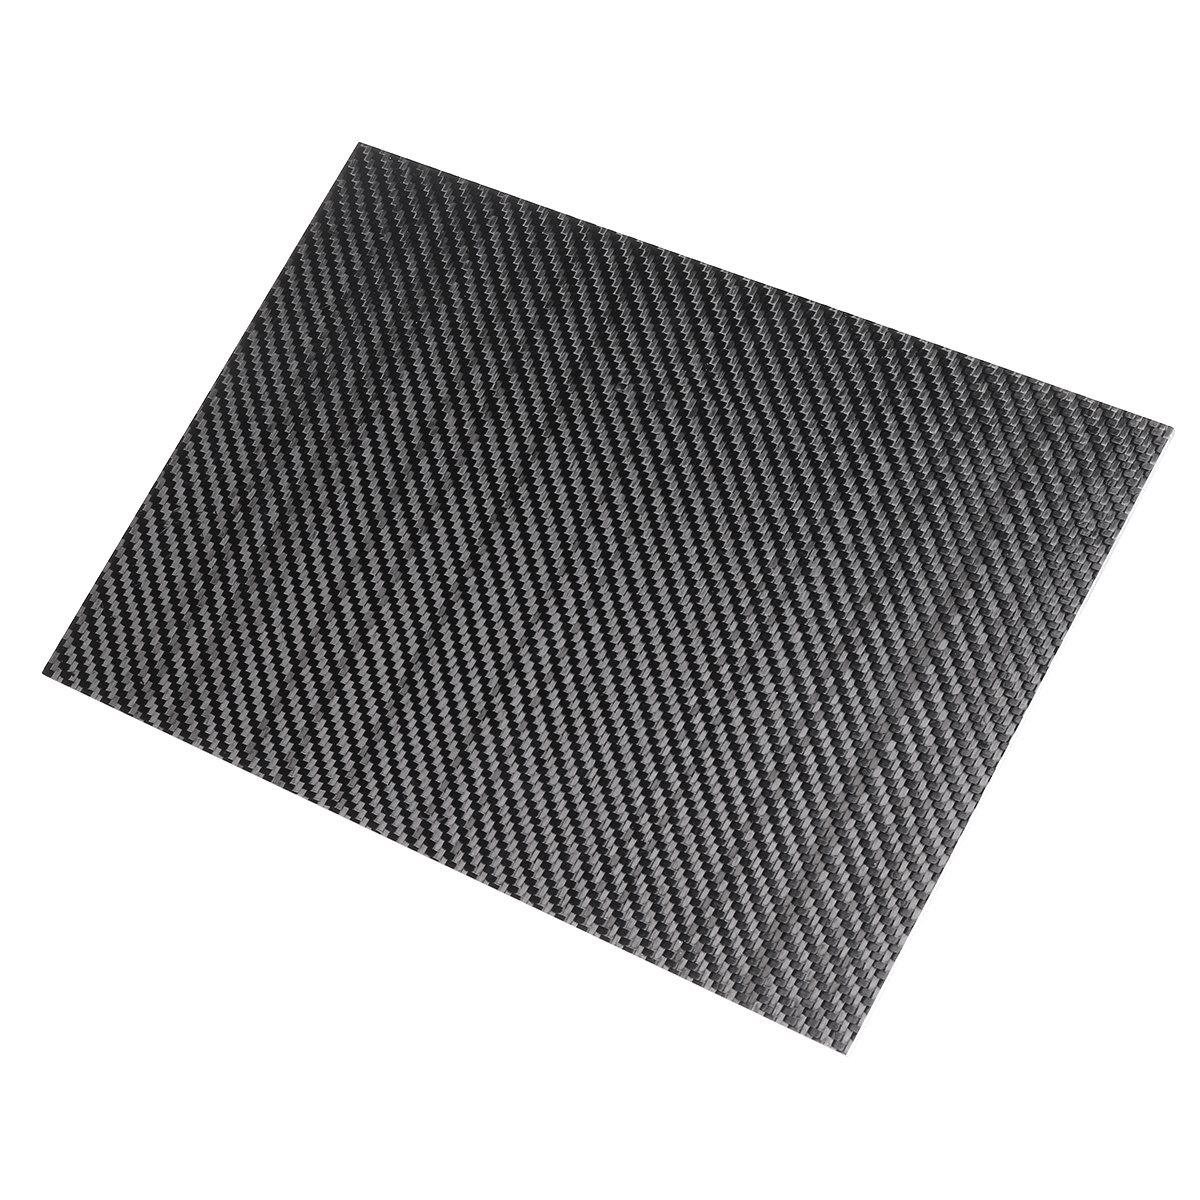 

400x500x(0.5-5)mm 3K Black Twill Weave Carbon Fiber Plate Sheet Glossy Carbon Fiber Board Panel High Composite RC Material